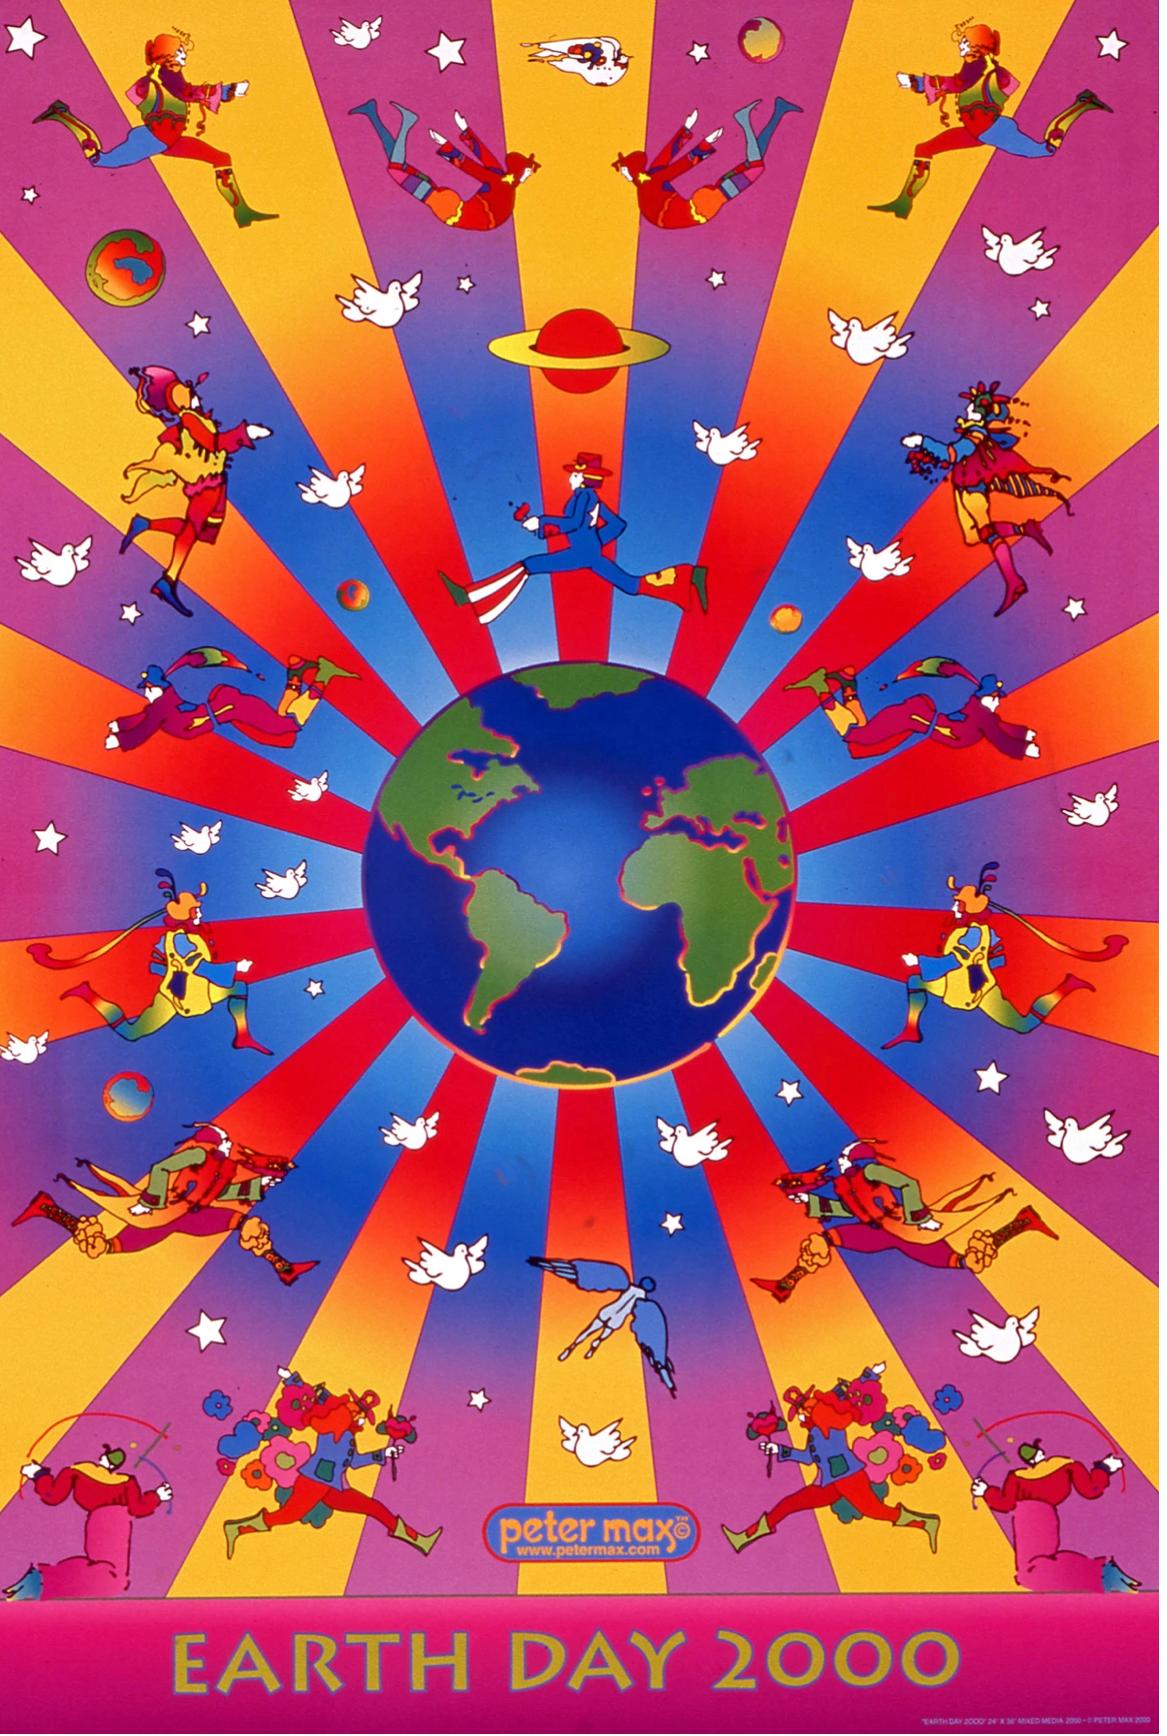 Earth Day 2000, Peter Max